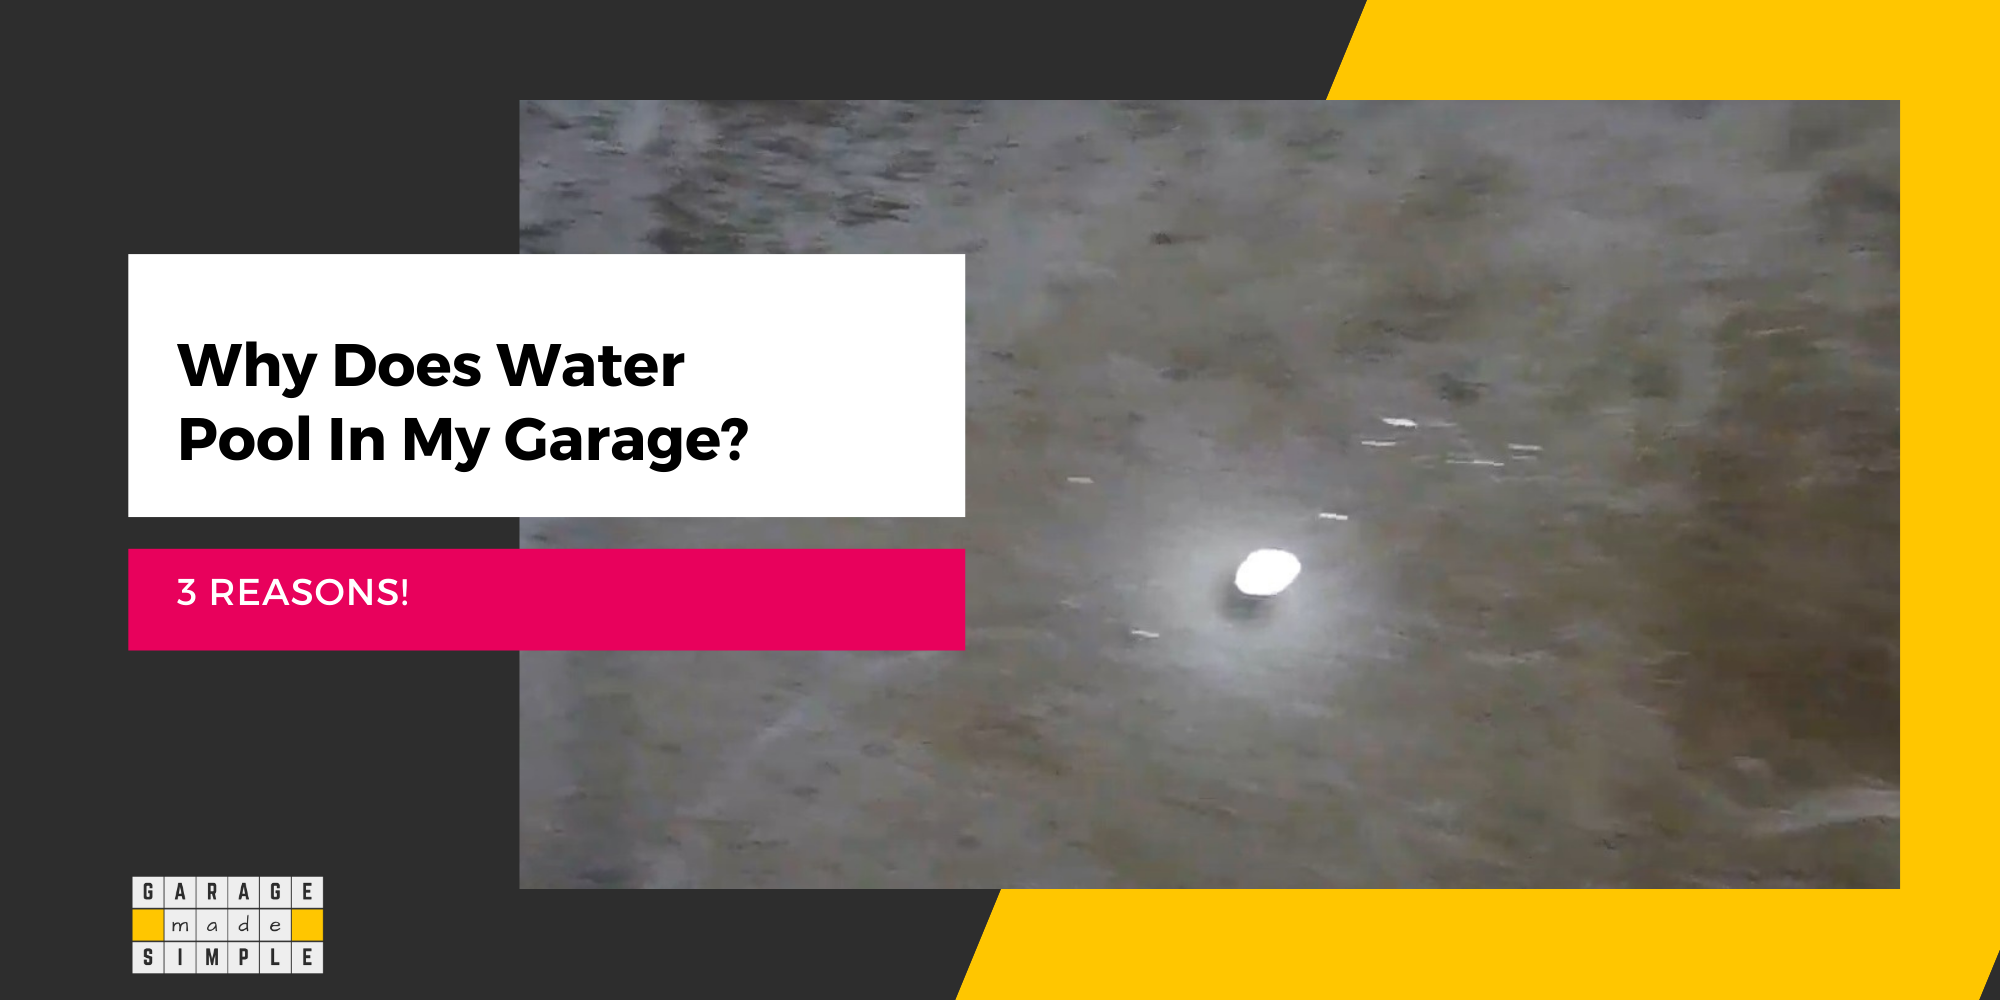 Why Does Water Pool In My Garage? (3 Reasons!)